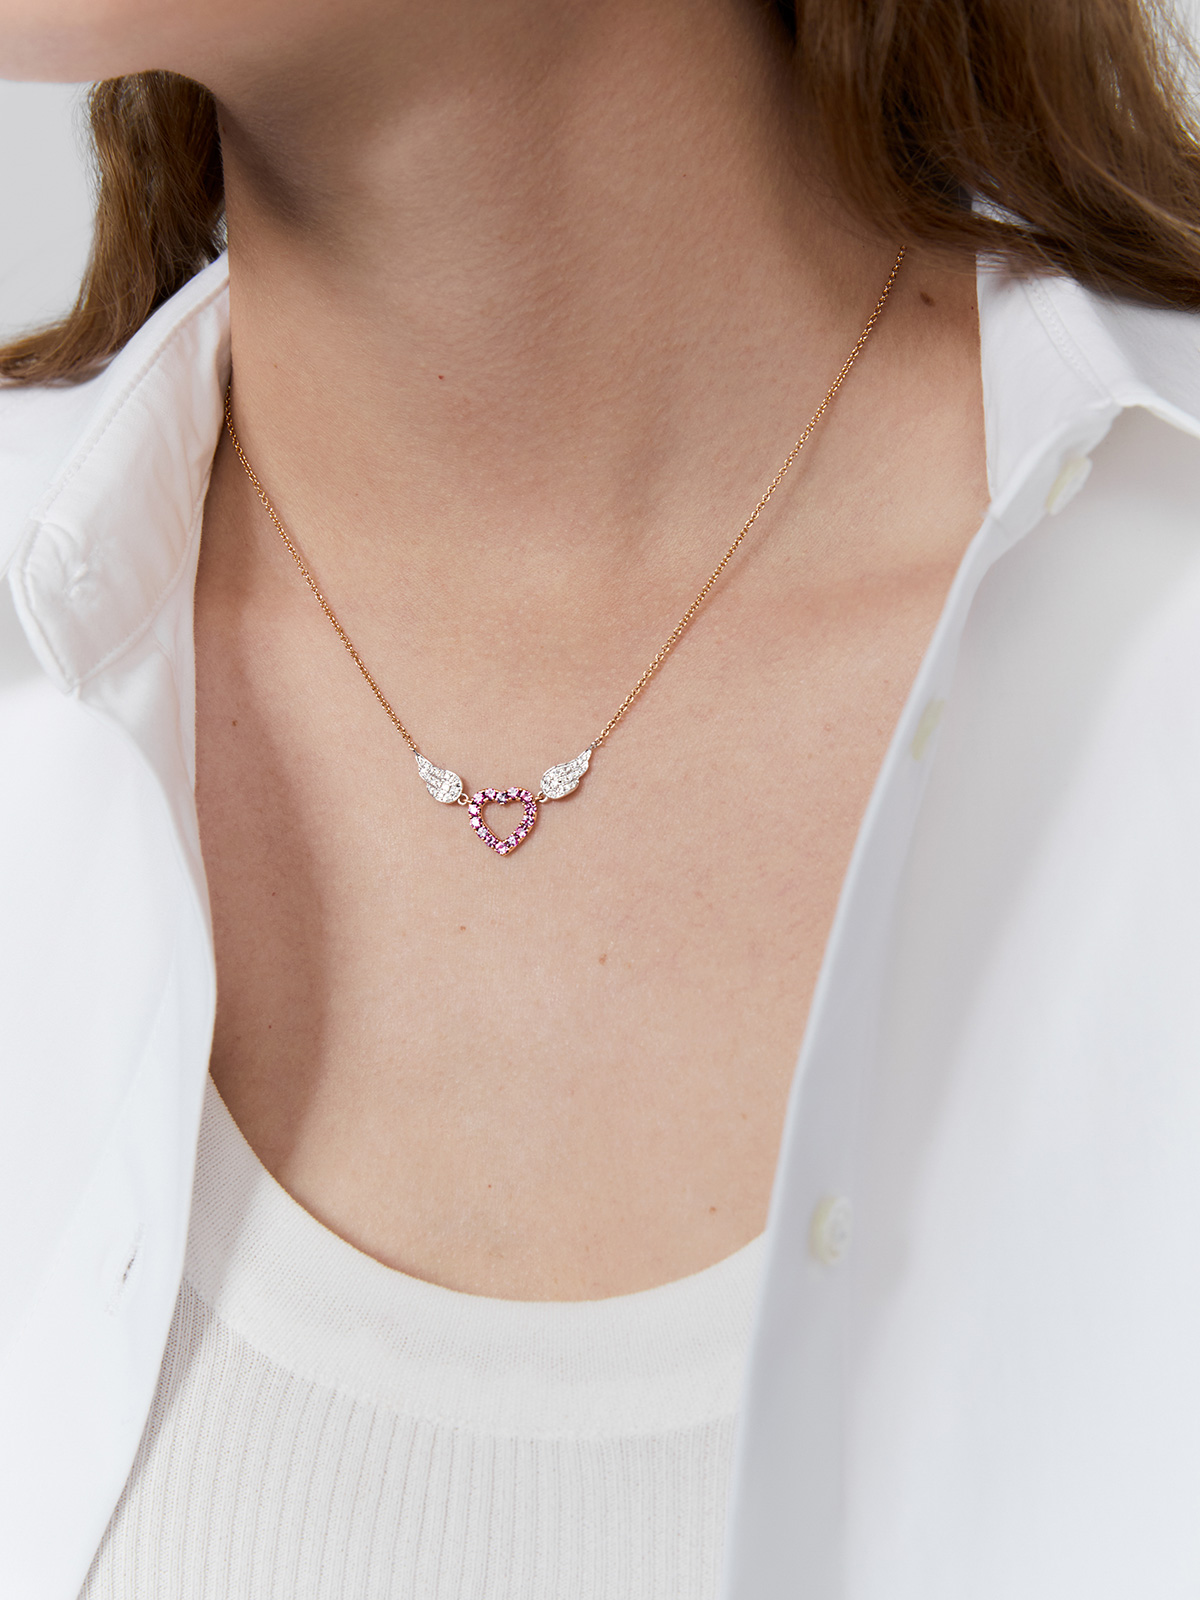 Heart pendant with rose gold and 18kt white gold wings adorned with pink sapphires and diamonds.